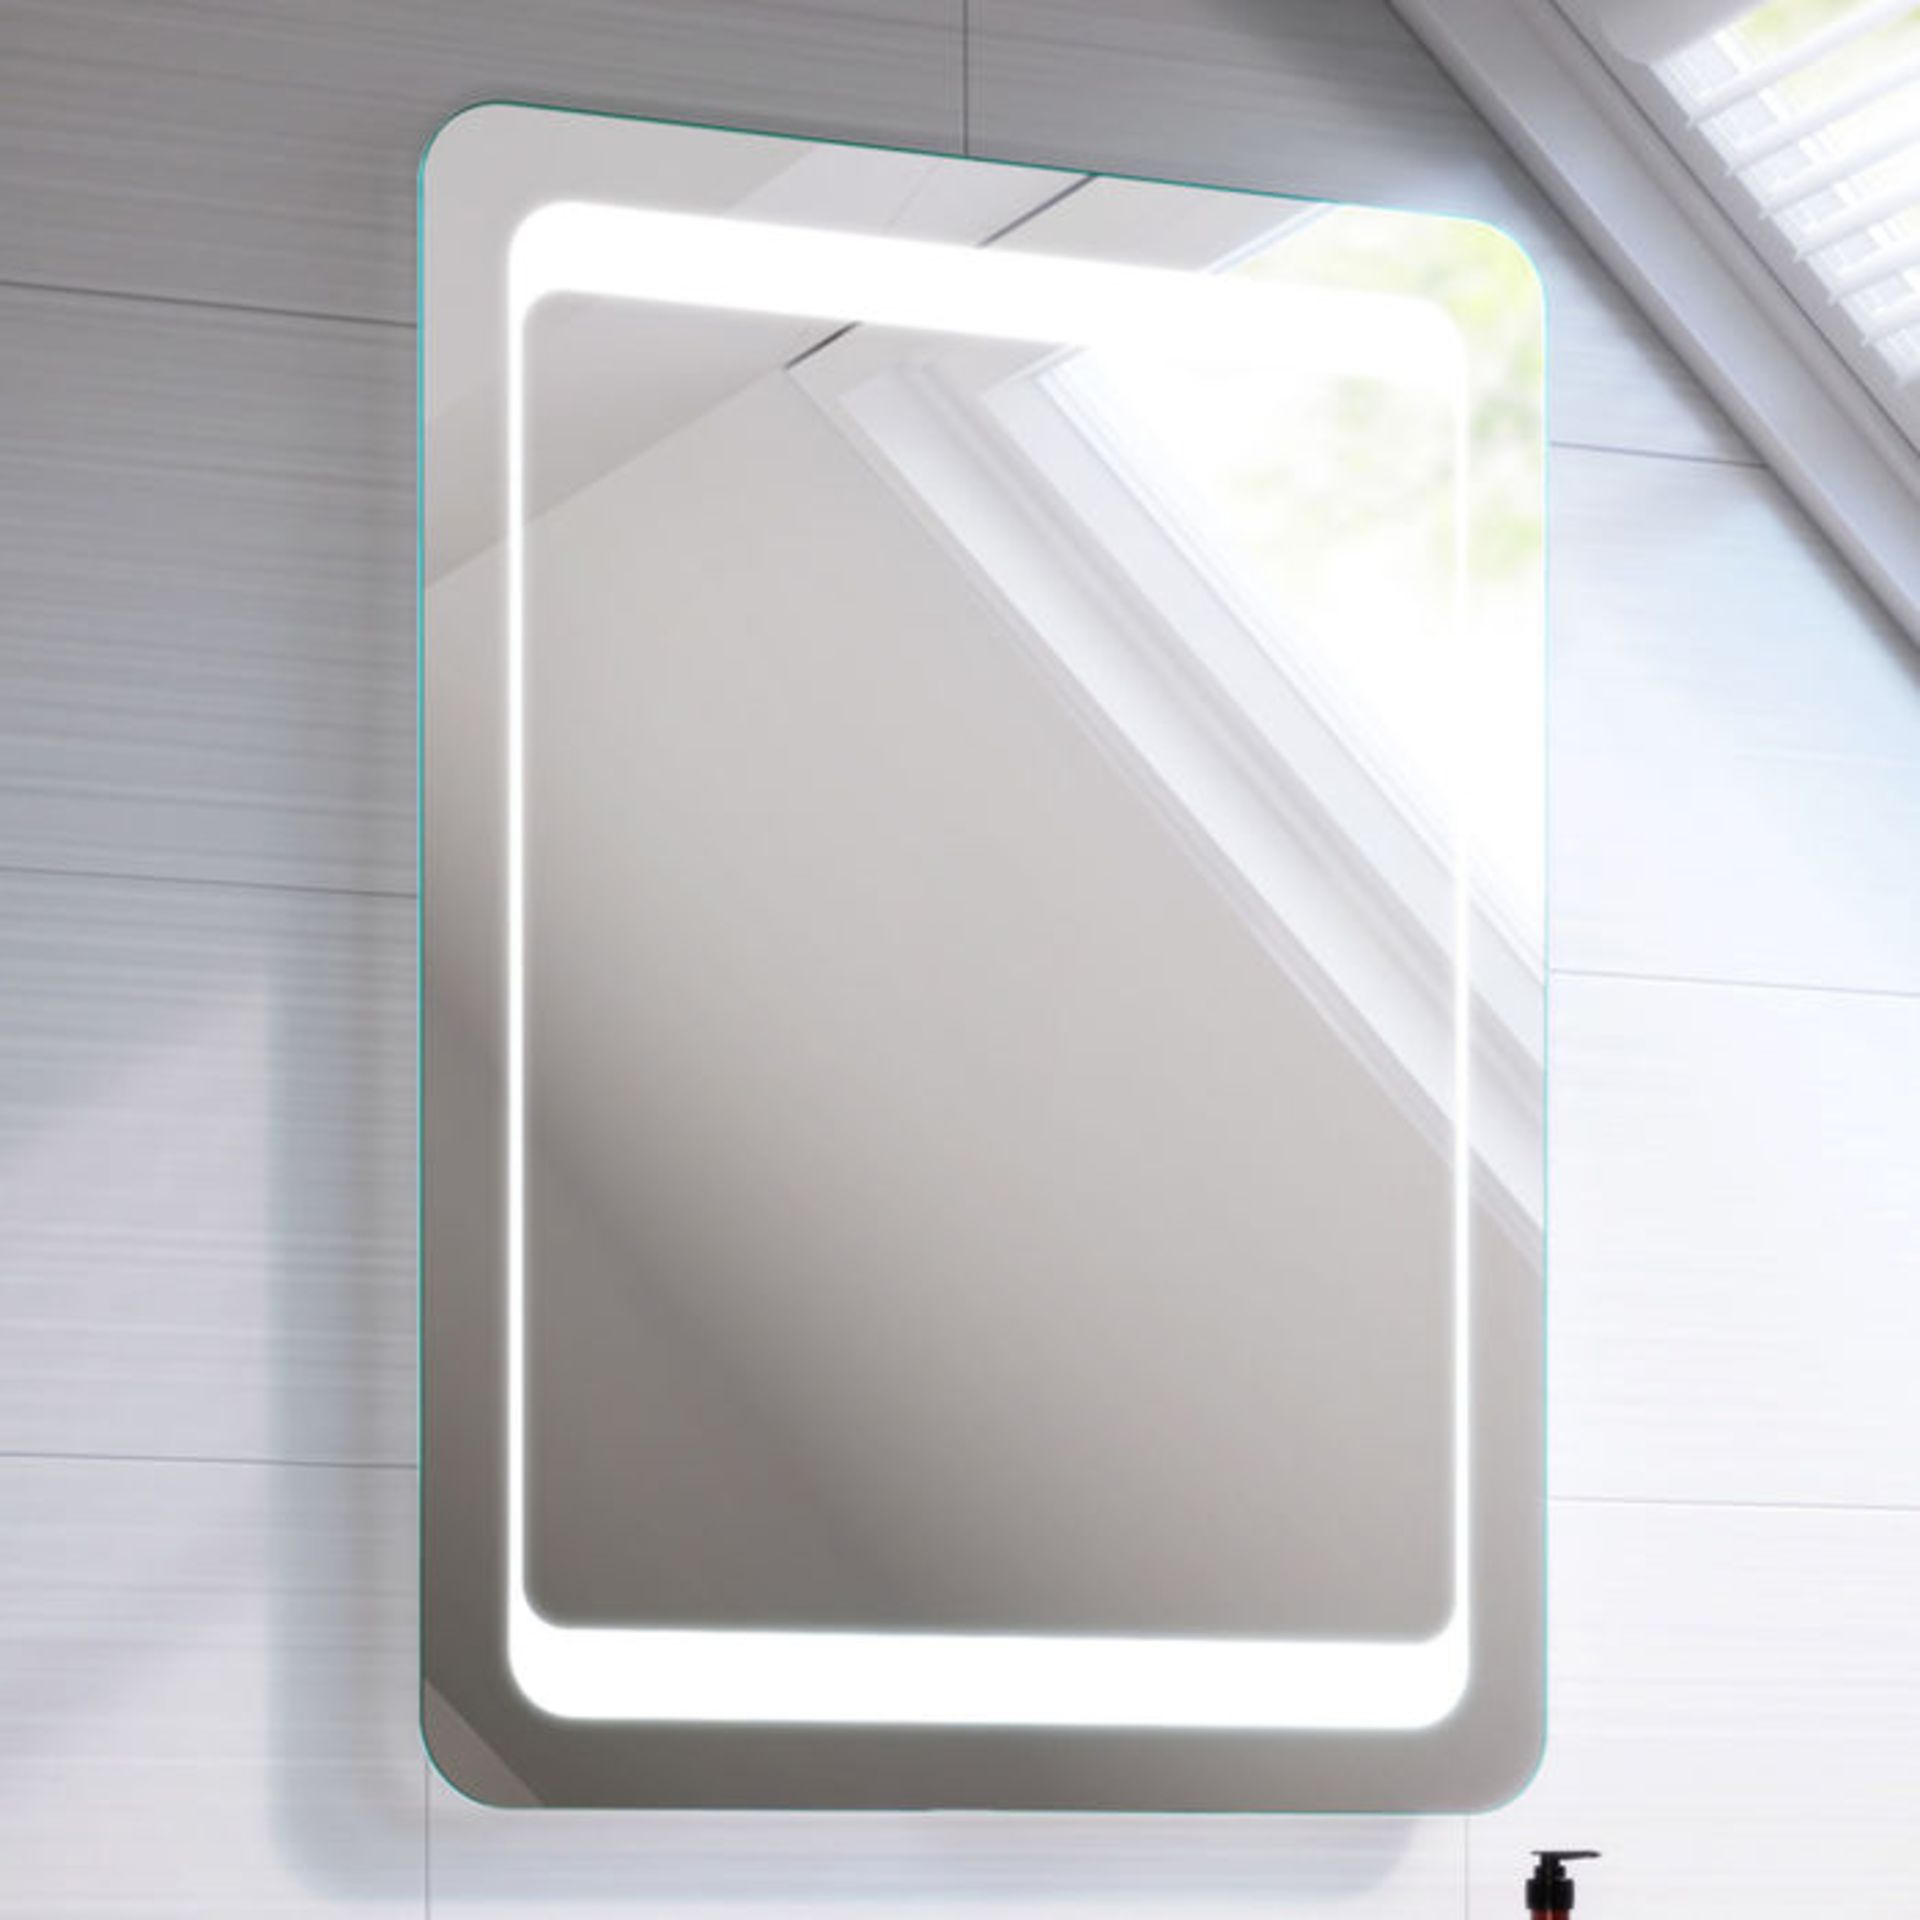 (LP173) 650x900mm Quasar Illuminated LED Mirror. RRP £349.99. Energy efficient LED lighting with - Image 2 of 5